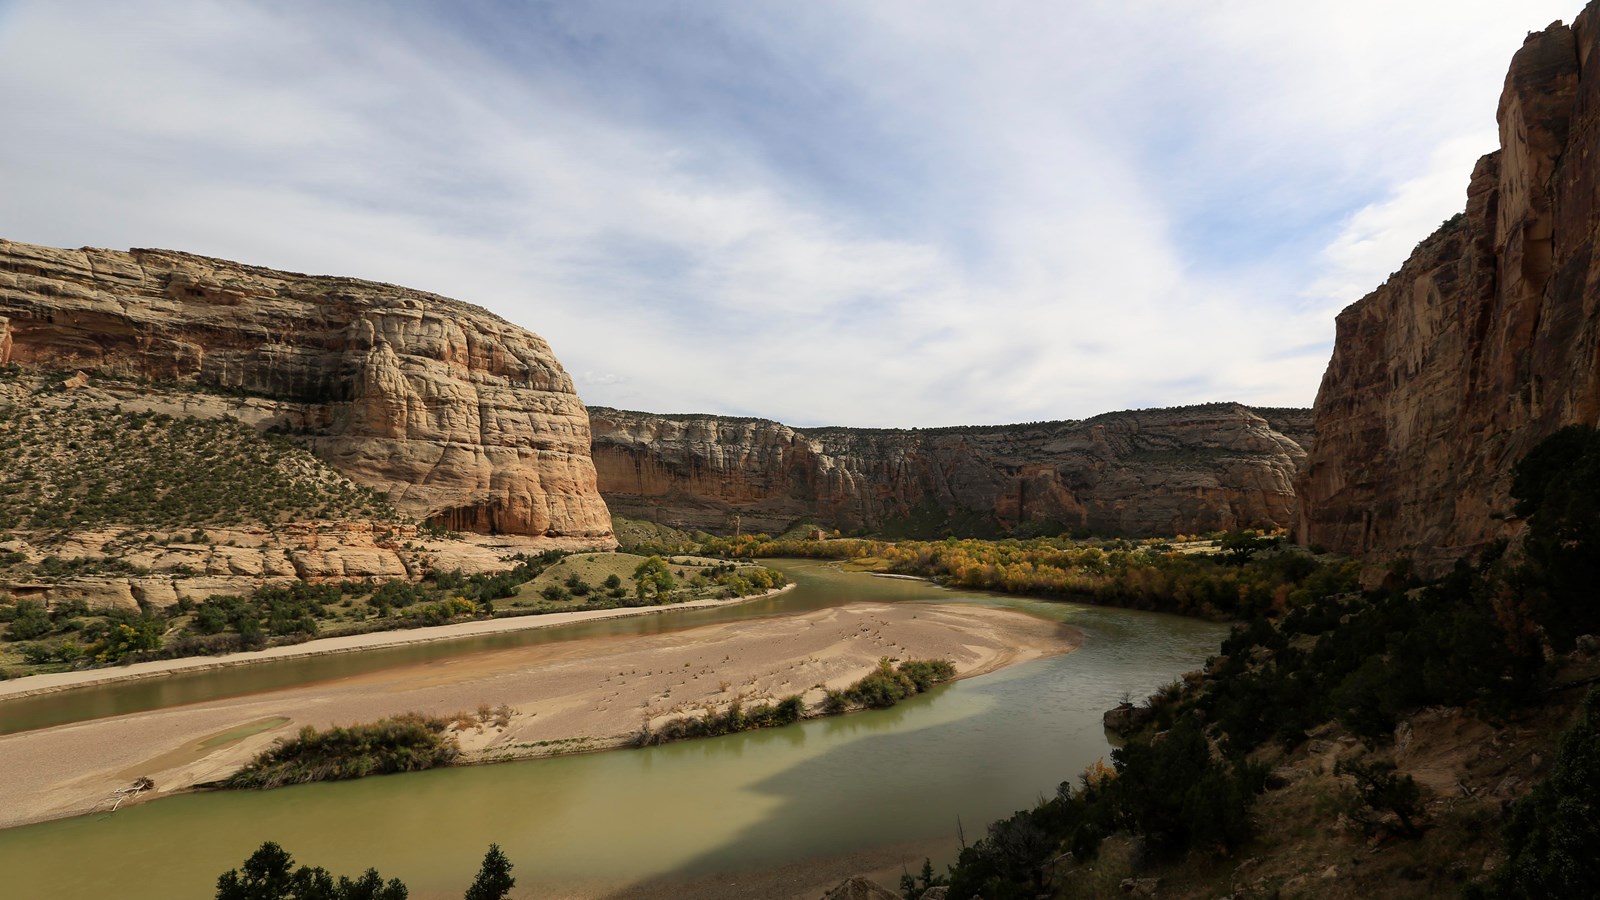 A sandstone canyon with a wide river containing long sand bars, flowing through.